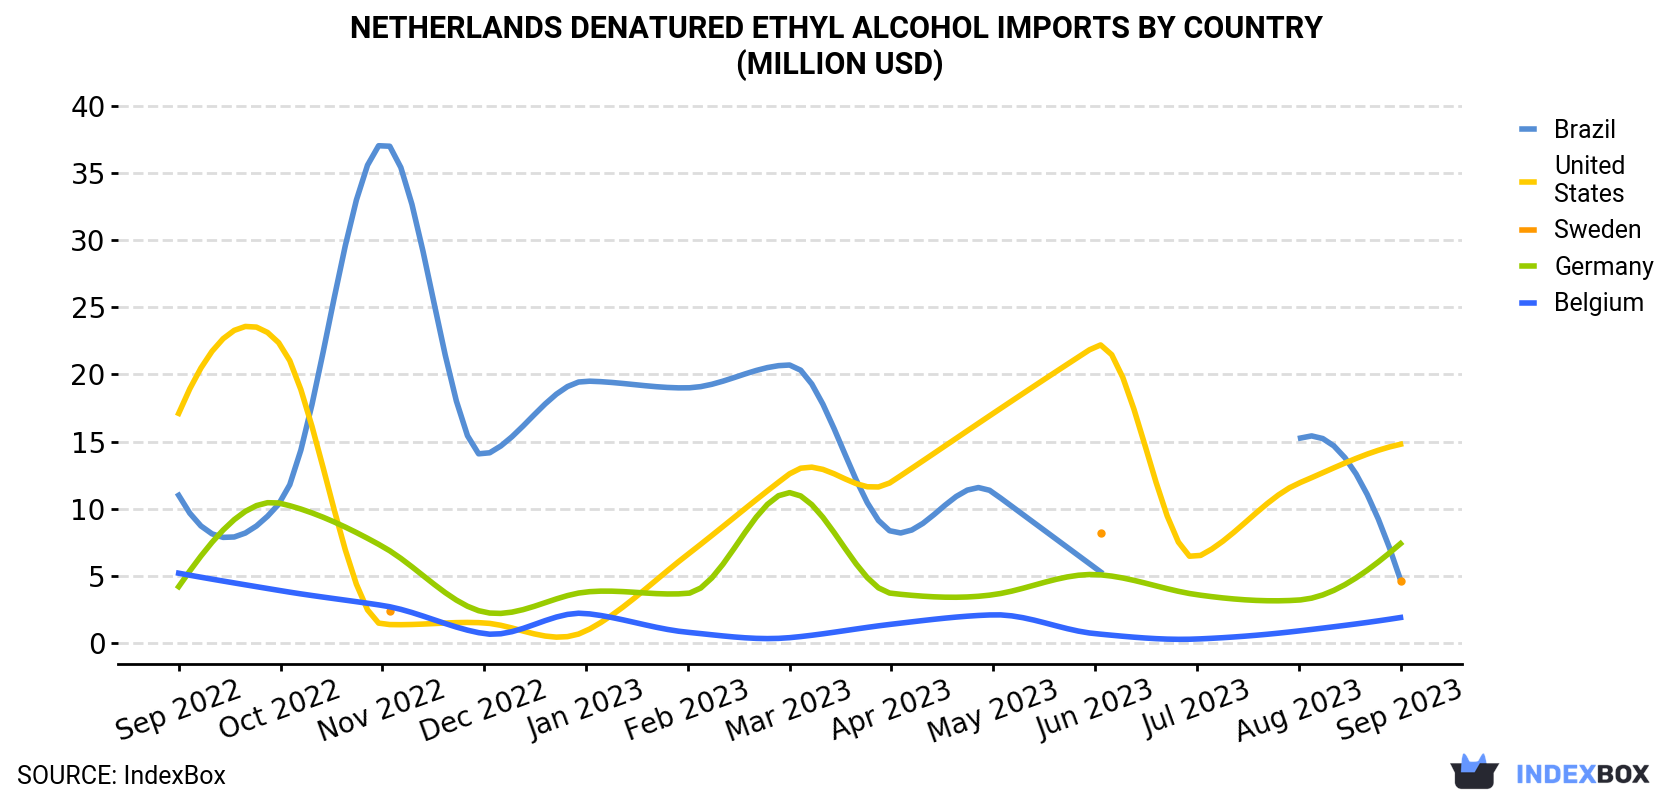 Netherlands Denatured Ethyl Alcohol Imports By Country (Million USD)